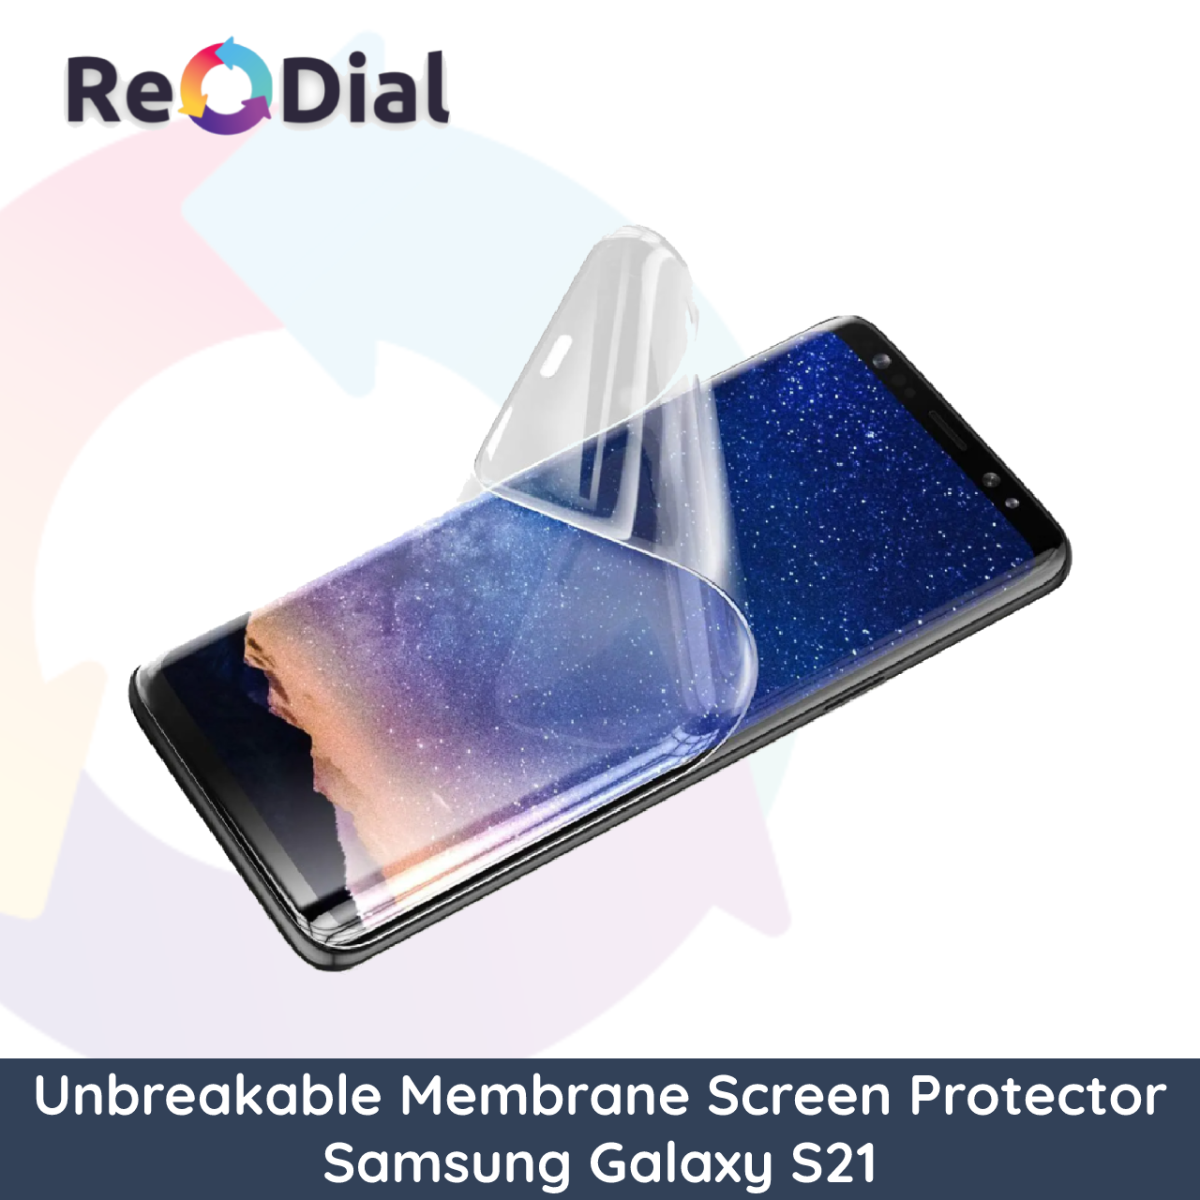 Unbreakable Membrane Screen Protector For Samsung Galaxy S21